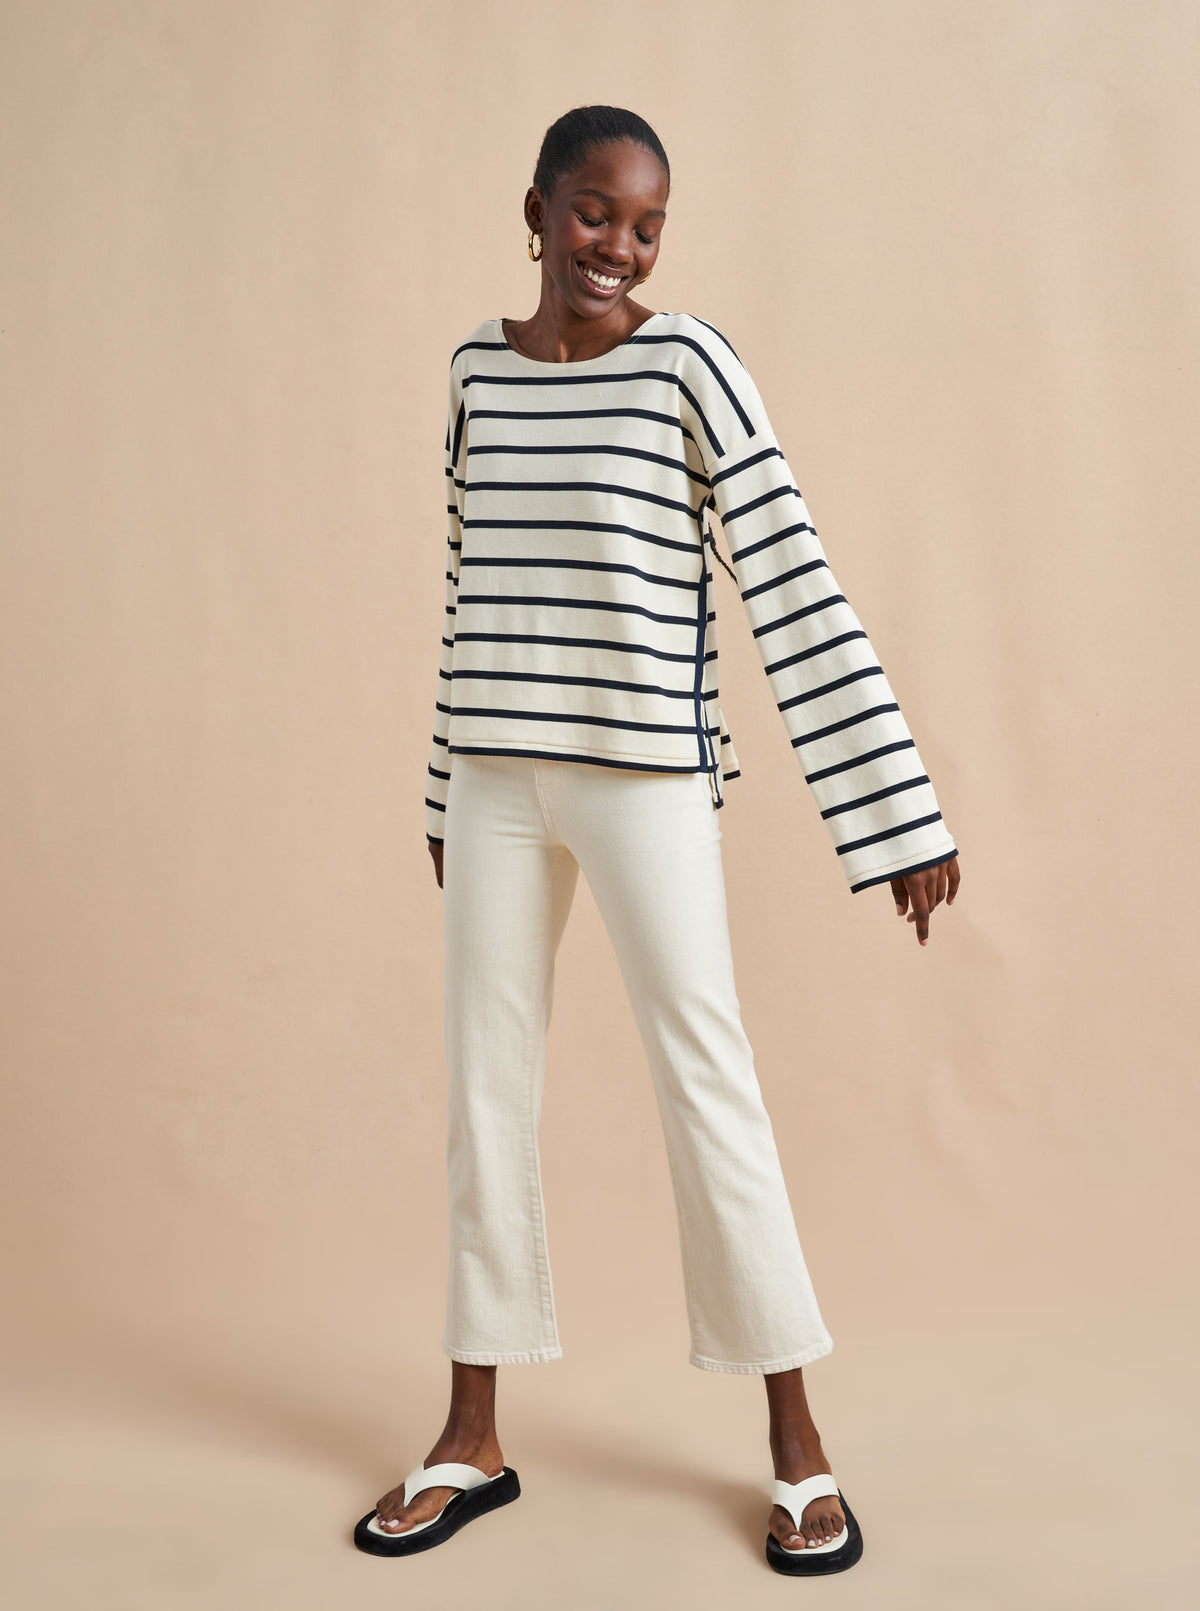 The epitome of quintessential Breton style, this long sleeve tee does it all in 100% super soft cream cotton with navy stripes.